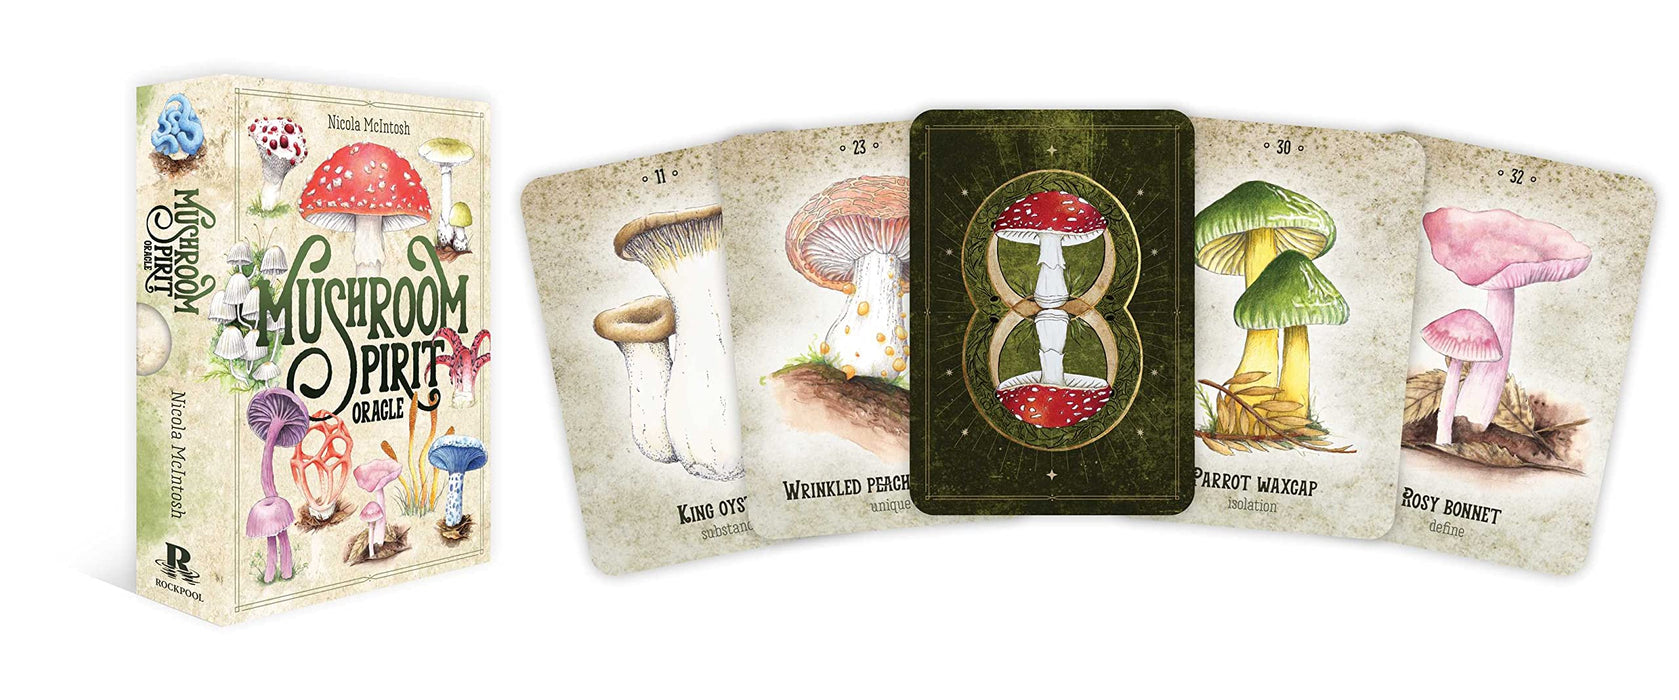 Mushroom Spirit Oracle: (36 Gilded Cards and 112-Page Full-Color Guidebook) - Nicola McIntosh